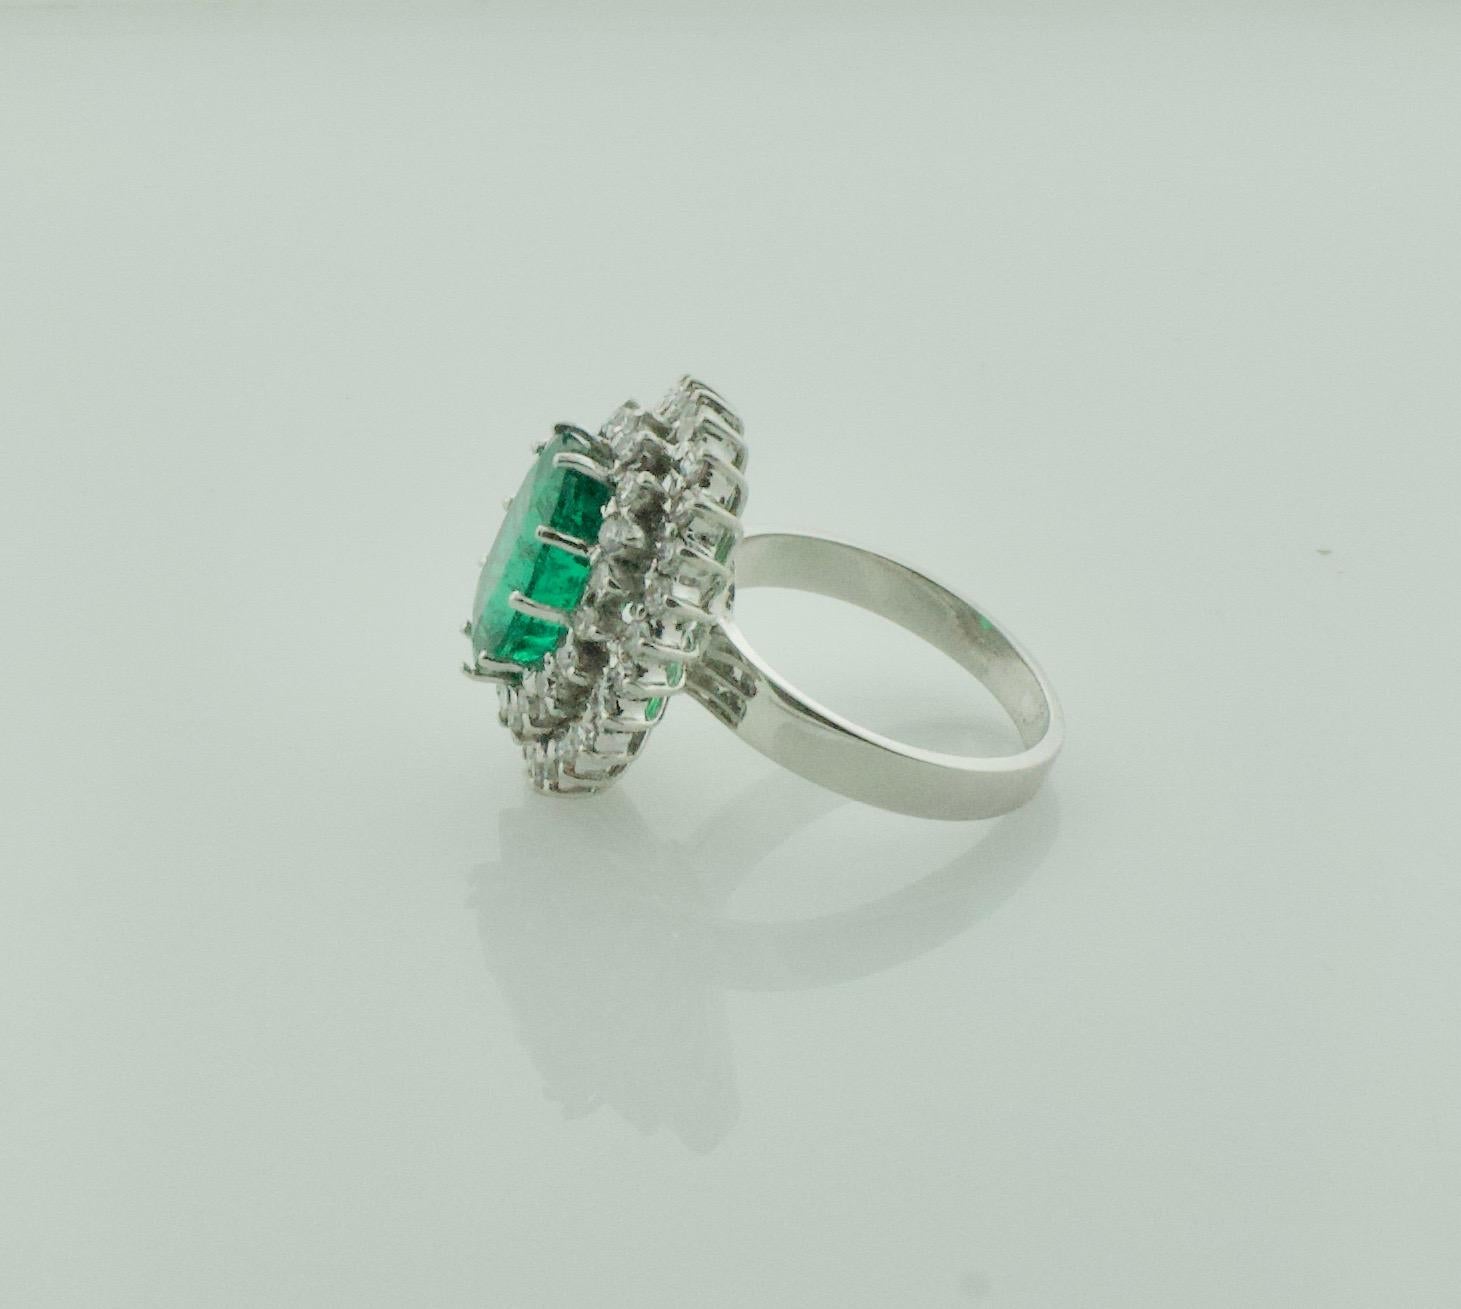 Oval Cut 4.49 Carat Emerald and Diamond Ring in 18 Karat with GIA Certificate For Sale